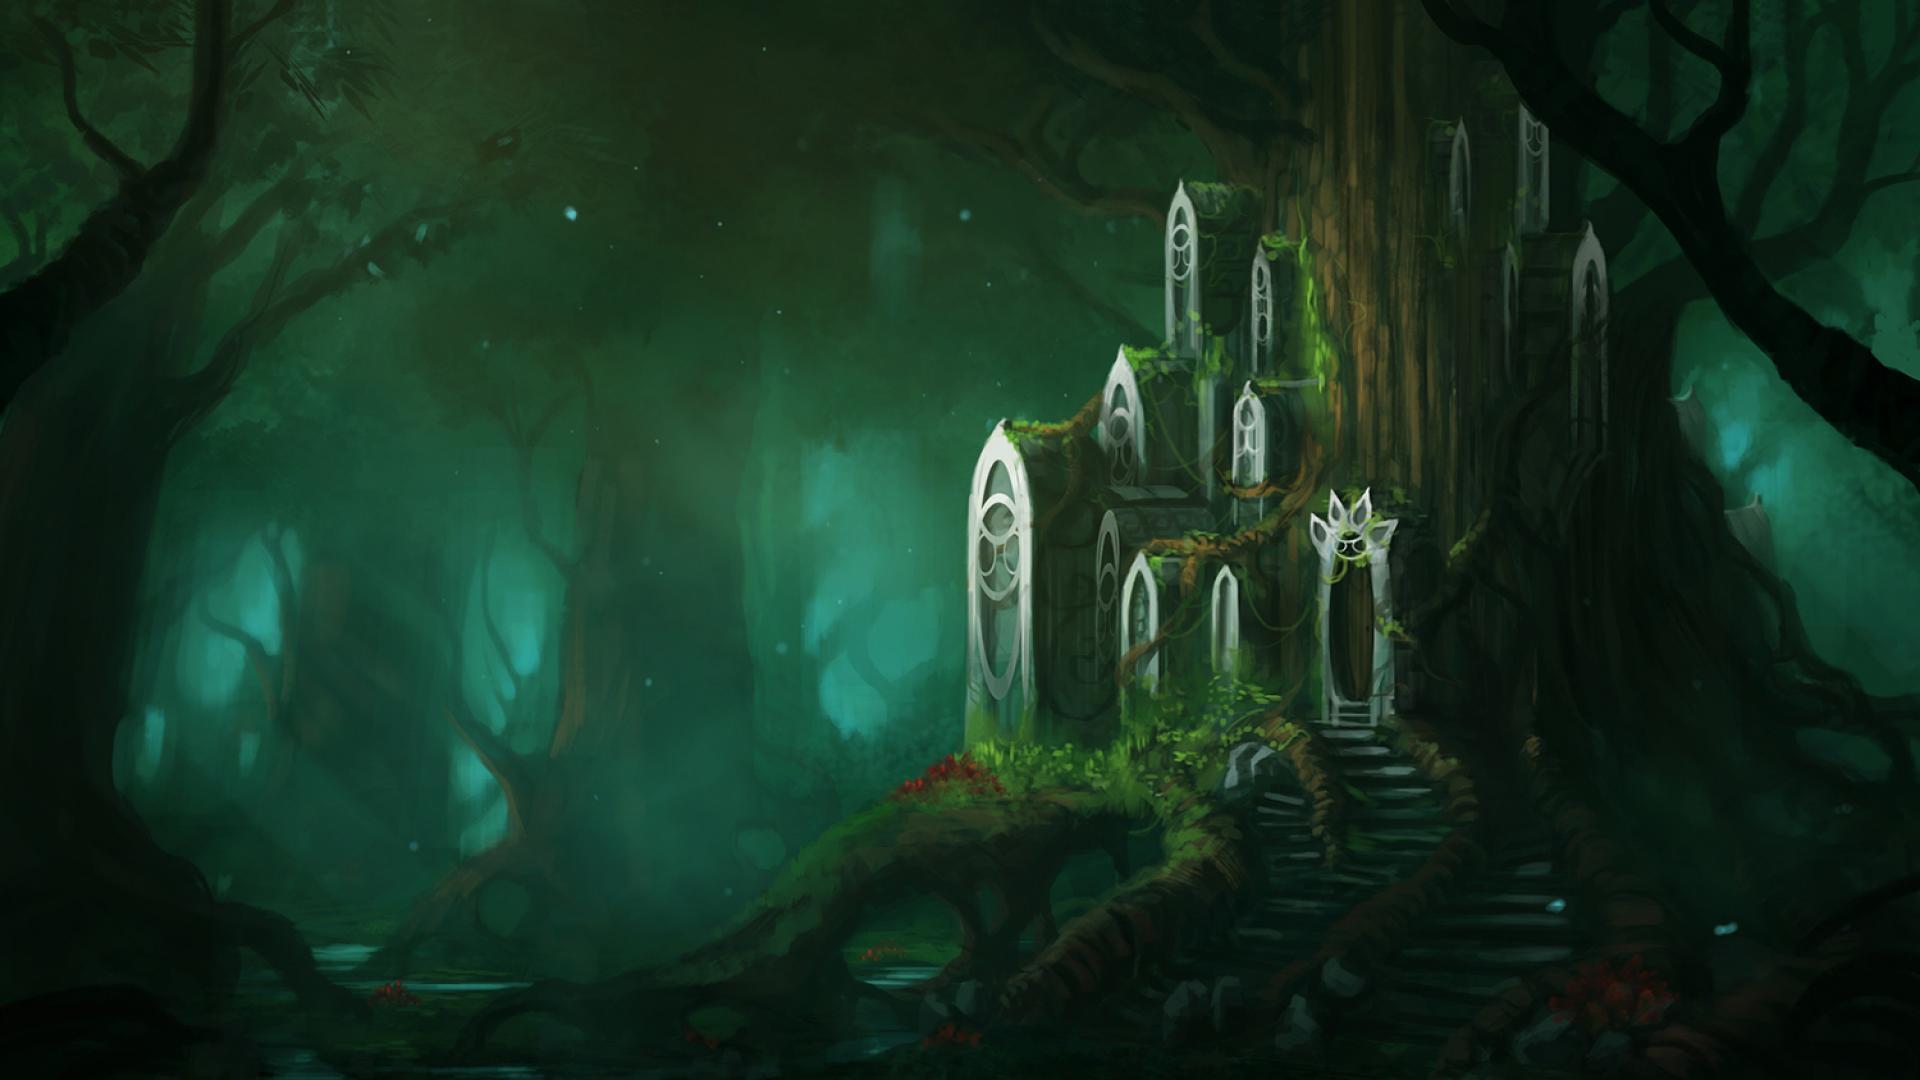 Fantasy Forest Wallpaper Images #lbbq > Mbuh.xyz